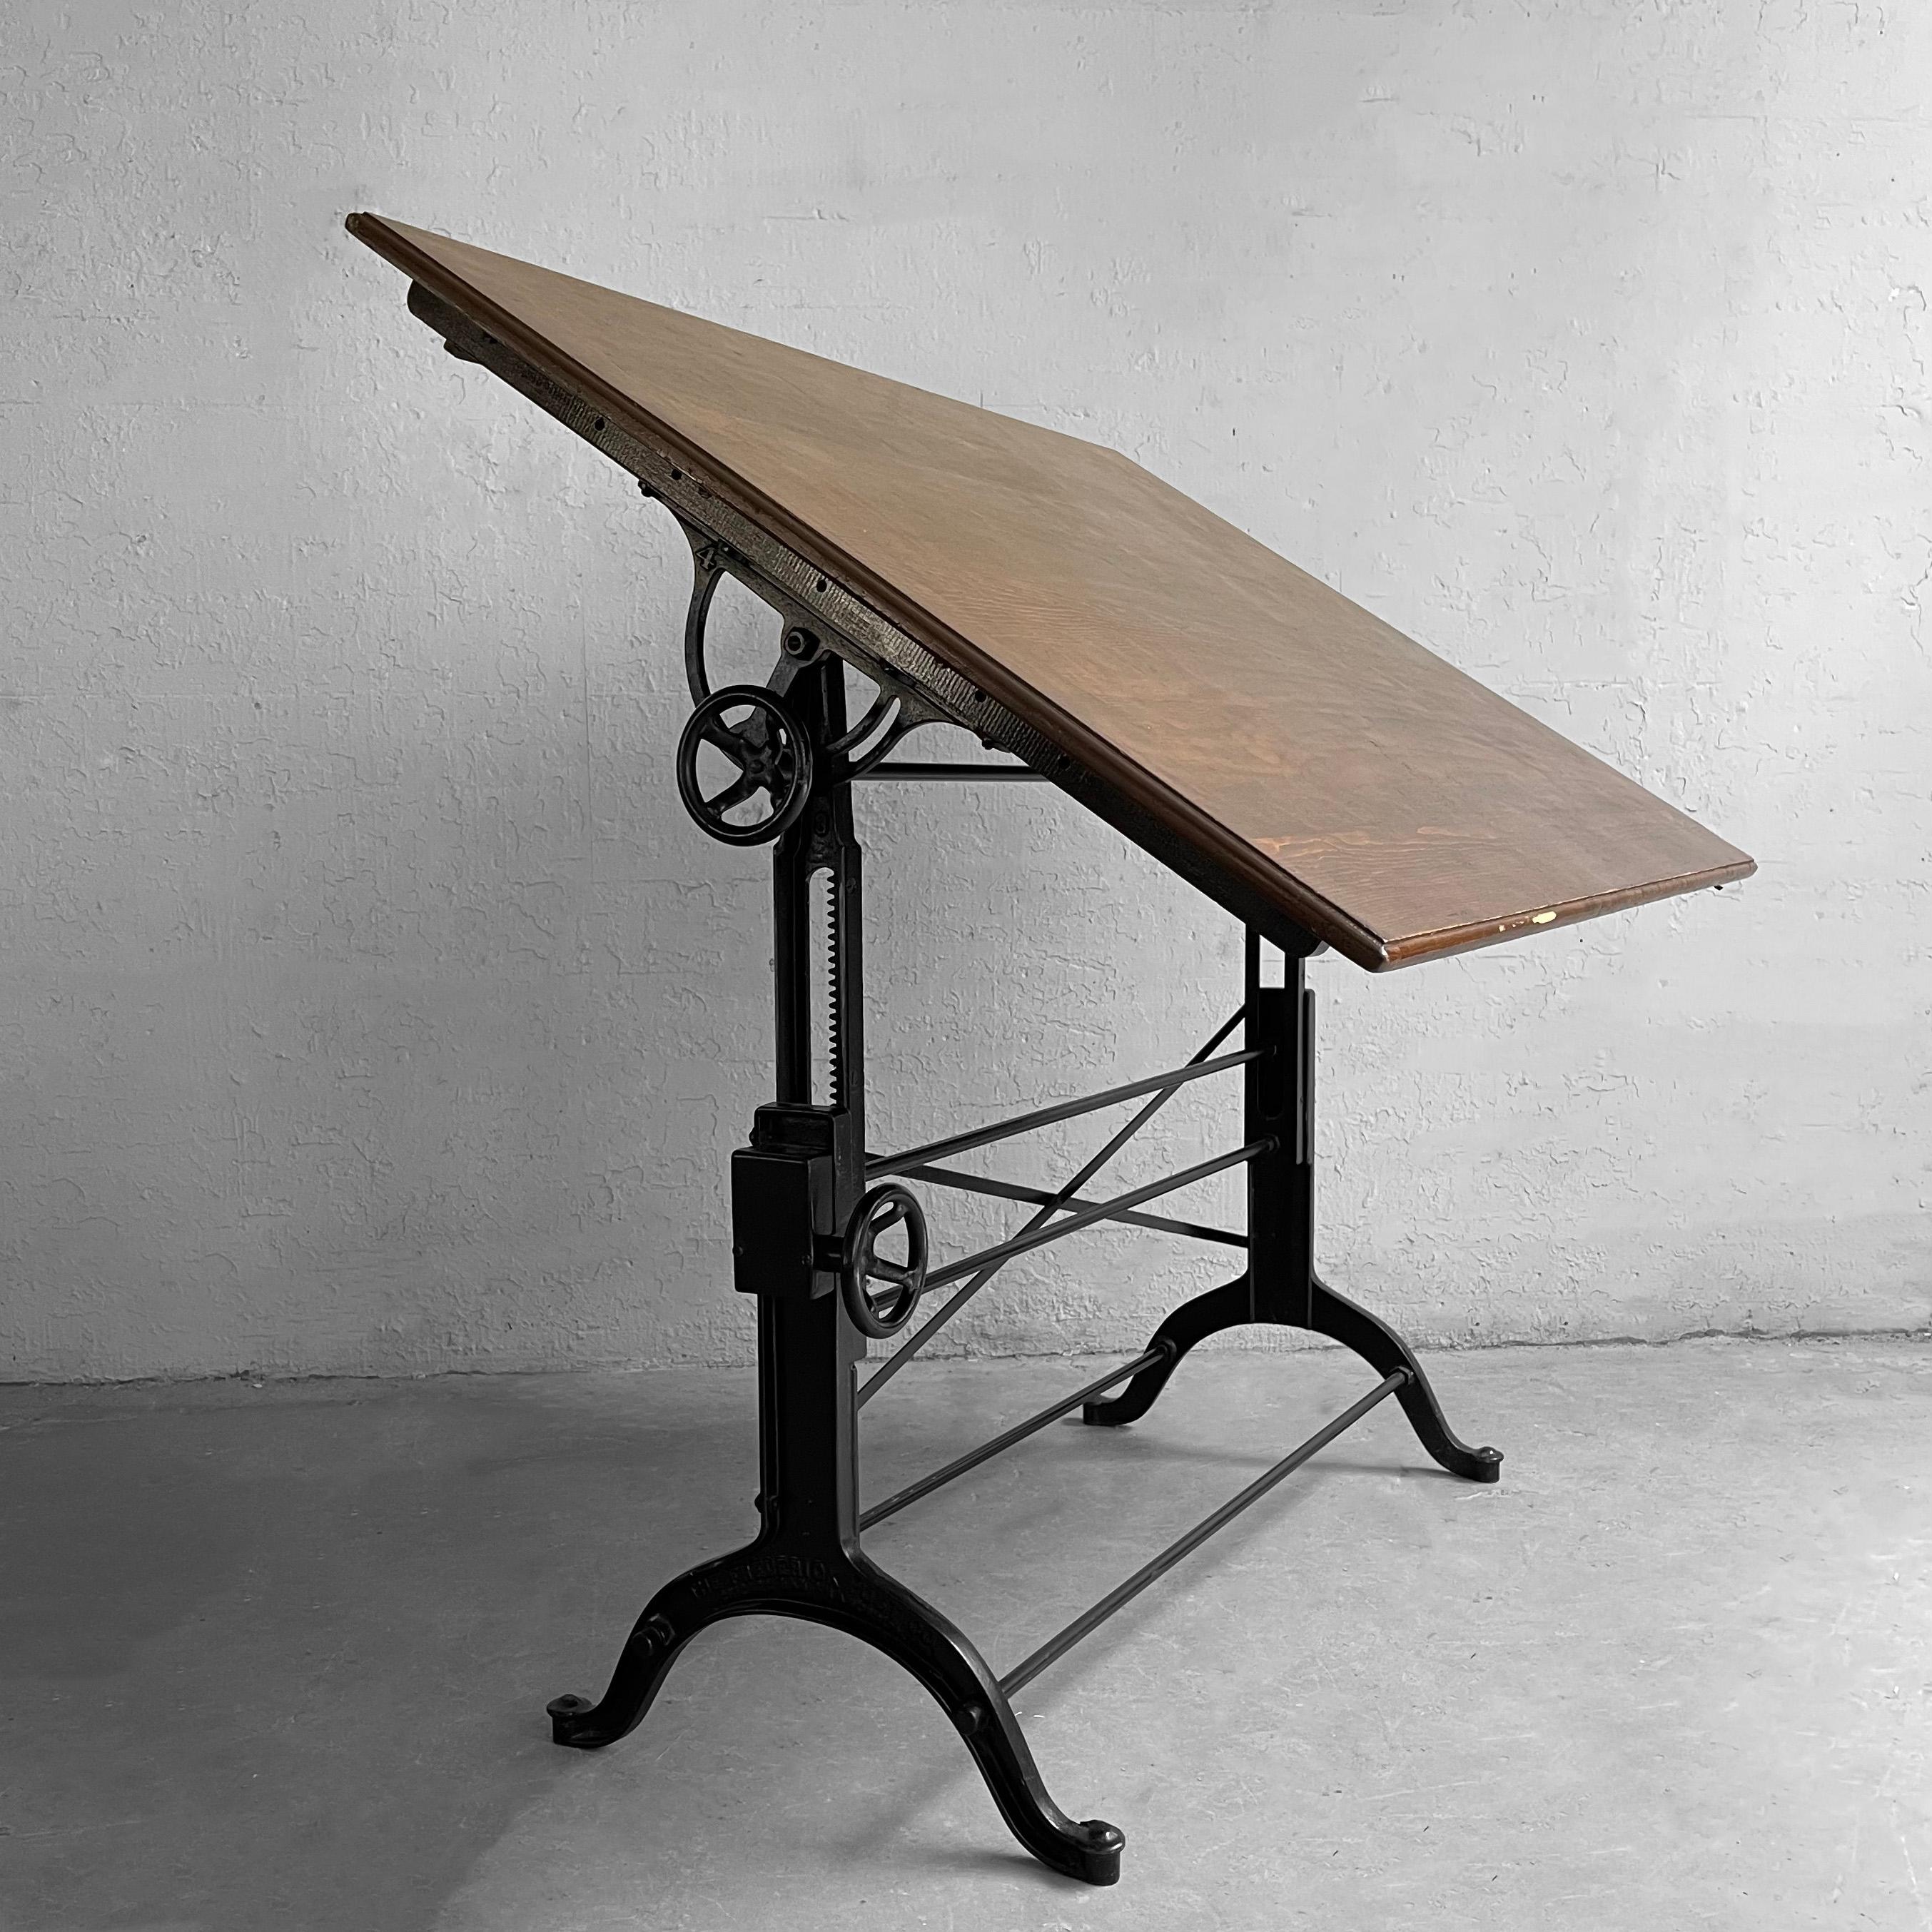 Early 20th century drafting table by the Frederick Post Co., features a stained maple top with 3 inch height storage drawer at the back and painted cast iron base. The table is height adjustable from 35-48 inches and tilt adjustable from almost